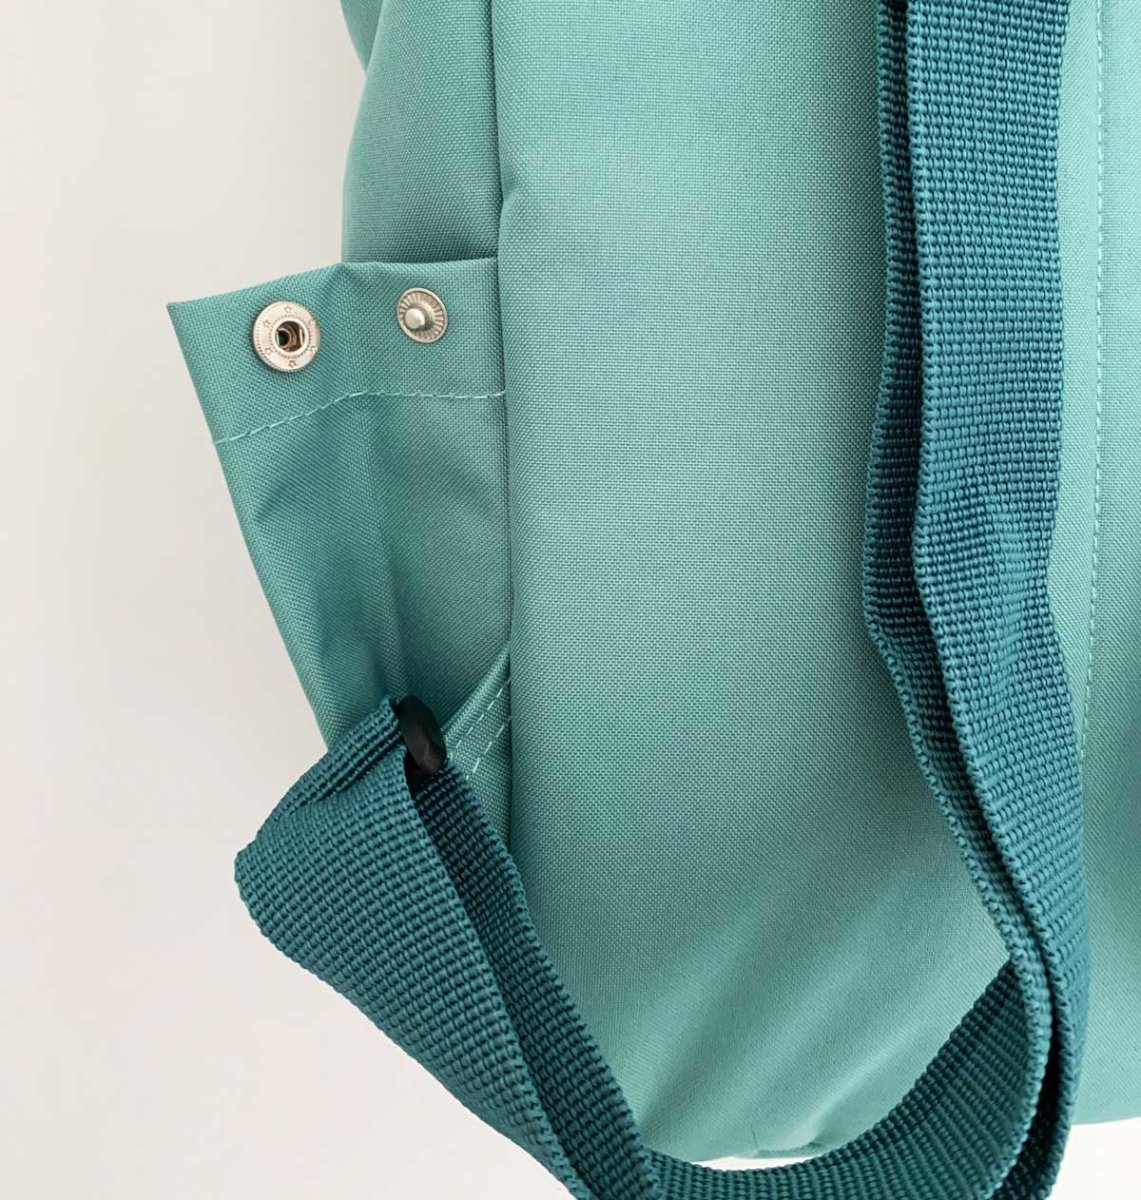 Otter Mini Roll-top Recycled Backpack - Blue Panda